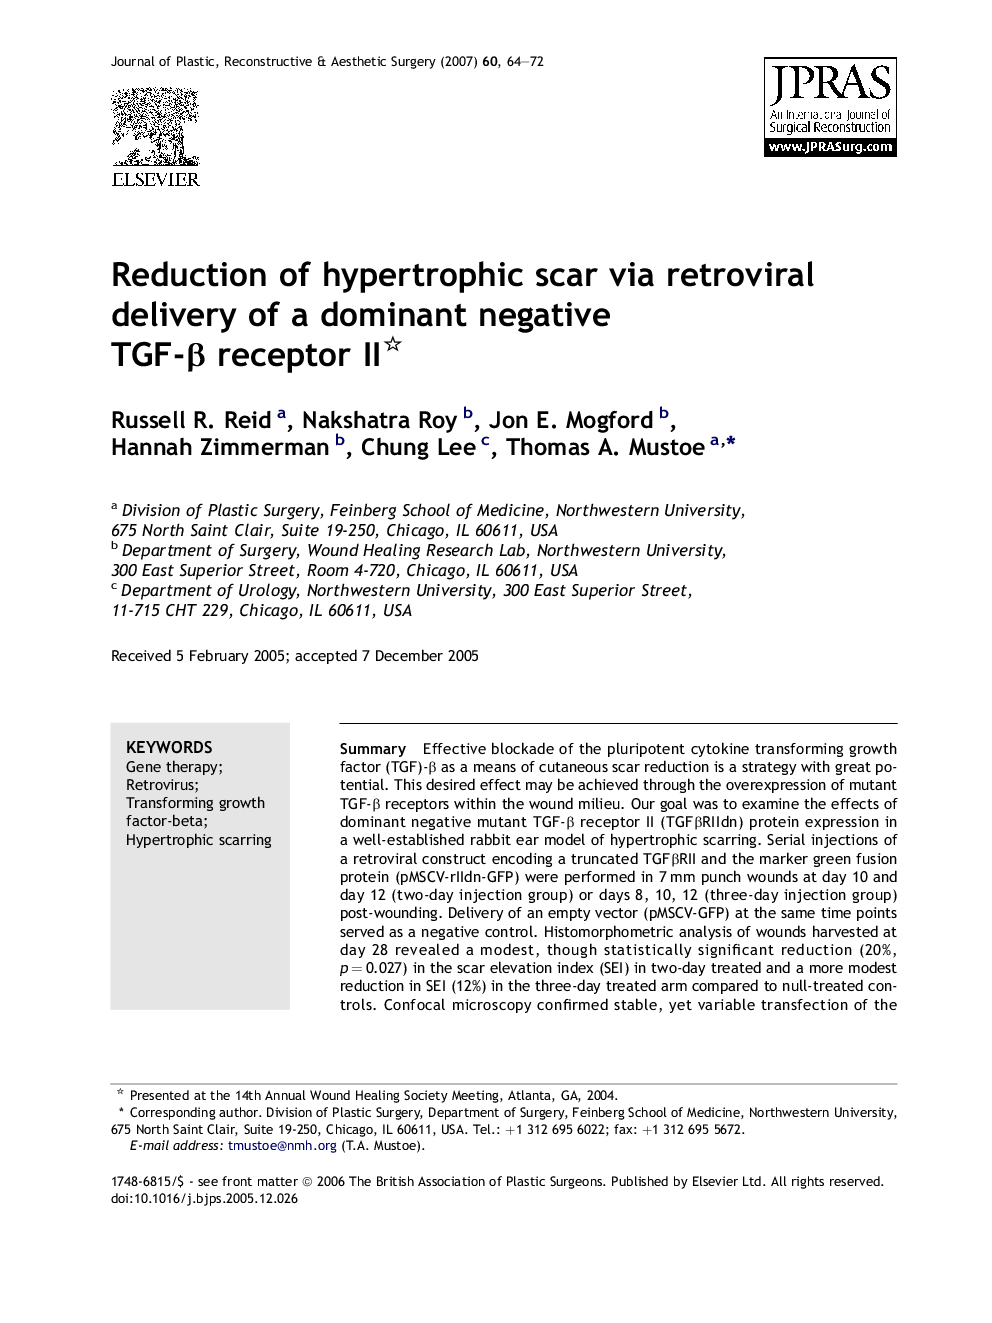 Reduction of hypertrophic scar via retroviral delivery of a dominant negative TGF-β receptor II 